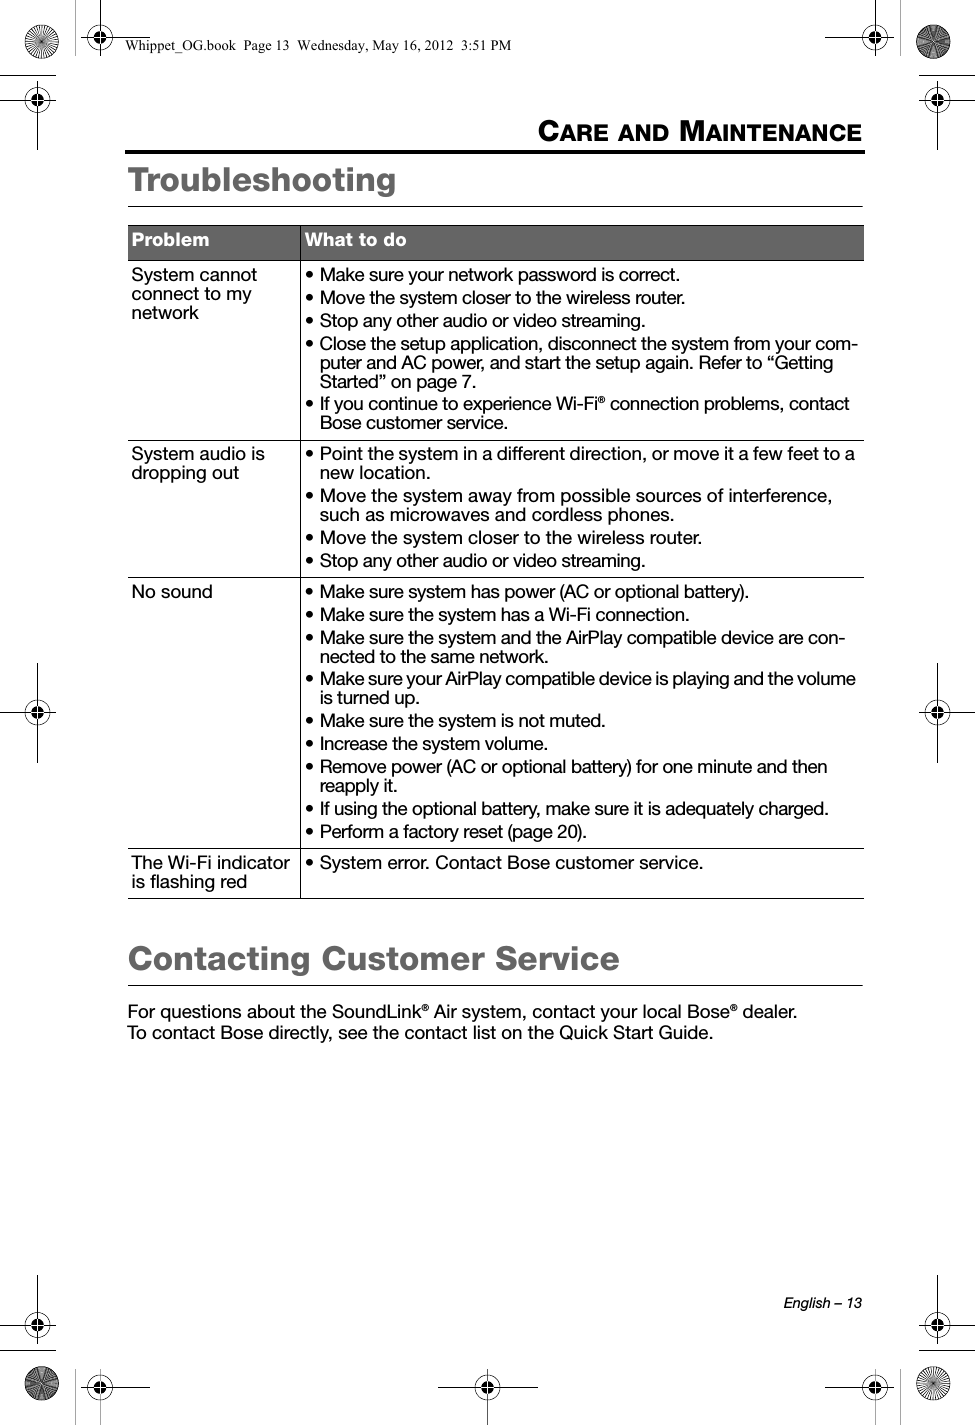 English – 13CARE AND MAINTENANCETroubleshootingContacting Customer ServiceFor questions about the SoundLink® Air system, contact your local Bose® dealer. To contact Bose directly, see the contact list on the Quick Start Guide.Problem What to doSystem cannot connect to my network• Make sure your network password is correct.• Move the system closer to the wireless router.• Stop any other audio or video streaming.• Close the setup application, disconnect the system from your com-puter and AC power, and start the setup again. Refer to “Getting Started” on page 7.• If you continue to experience Wi-Fi® connection problems, contact Bose customer service.System audio is dropping out• Point the system in a different direction, or move it a few feet to a new location.• Move the system away from possible sources of interference, such as microwaves and cordless phones.• Move the system closer to the wireless router.• Stop any other audio or video streaming.No sound • Make sure system has power (AC or optional battery).• Make sure the system has a Wi-Fi connection.• Make sure the system and the AirPlay compatible device are con-nected to the same network.• Make sure your AirPlay compatible device is playing and the volume is turned up.• Make sure the system is not muted.• Increase the system volume.• Remove power (AC or optional battery) for one minute and then reapply it.• If using the optional battery, make sure it is adequately charged.• Perform a factory reset (page 20).The Wi-Fi indicator is flashing red• System error. Contact Bose customer service.Whippet_OG.book  Page 13  Wednesday, May 16, 2012  3:51 PM